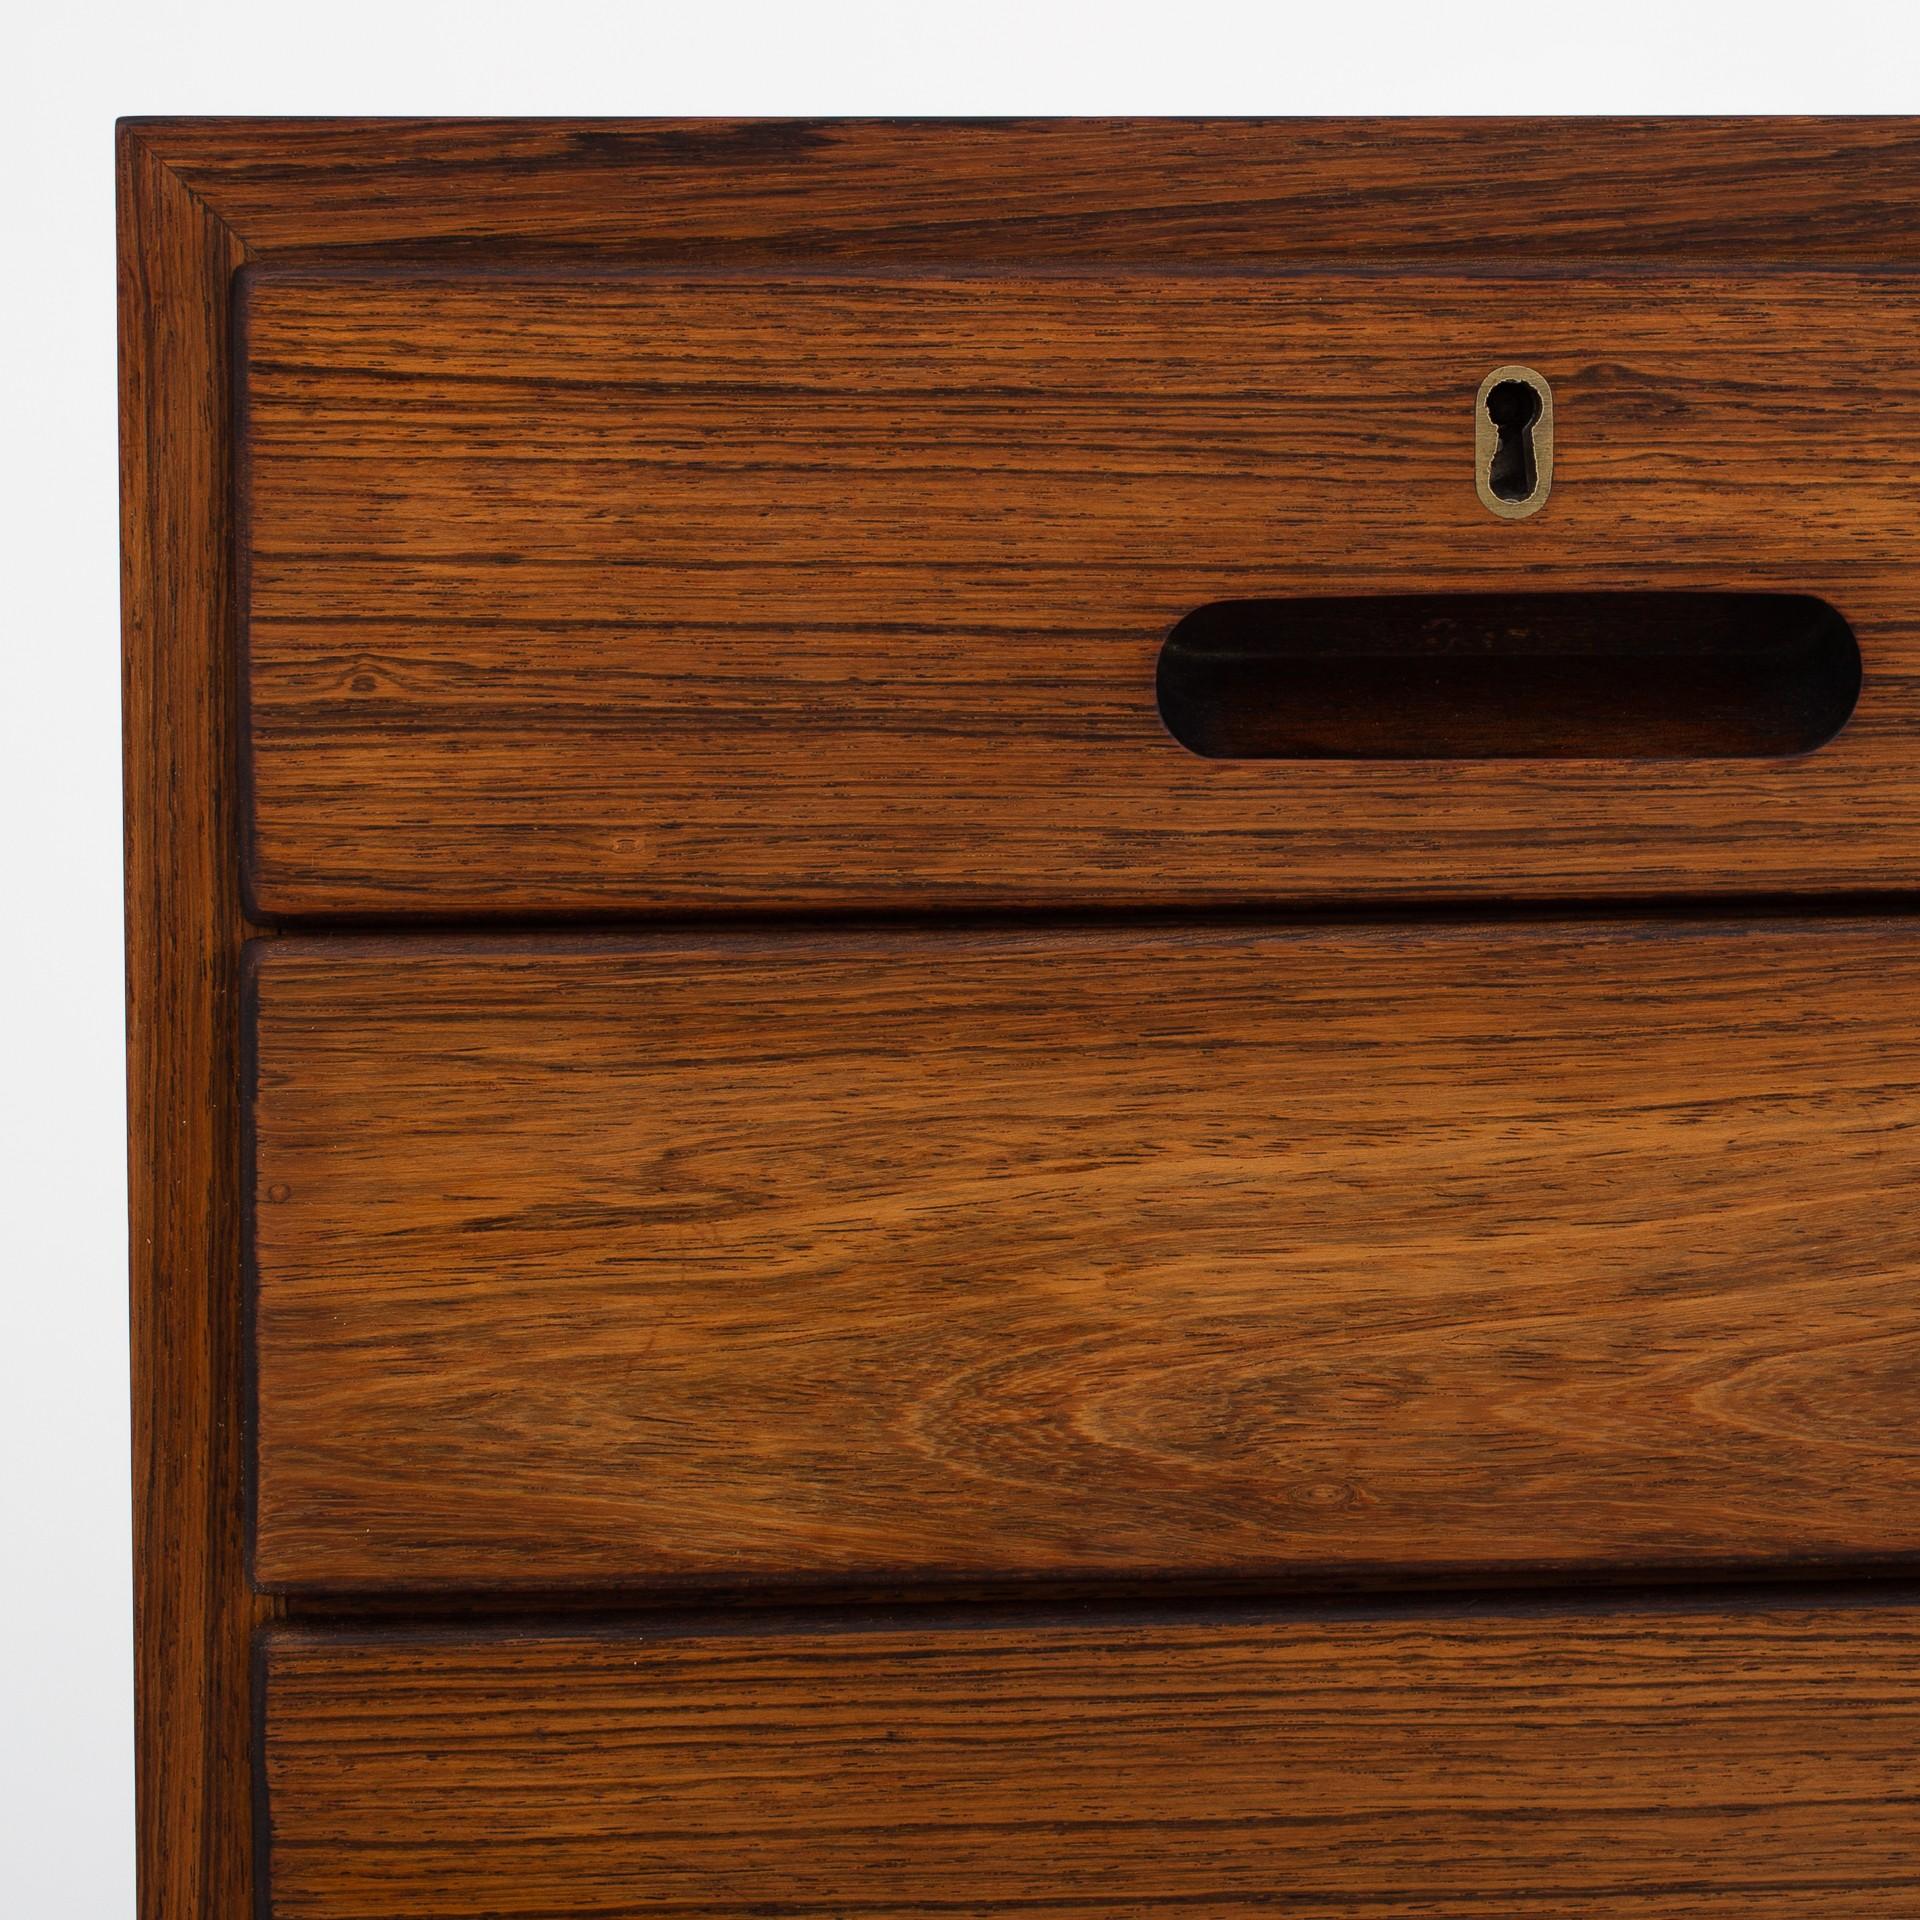 Chest of drawers in rosewood consisting of 8 drawers with brass key-holes. Maker P. Jeppesen.